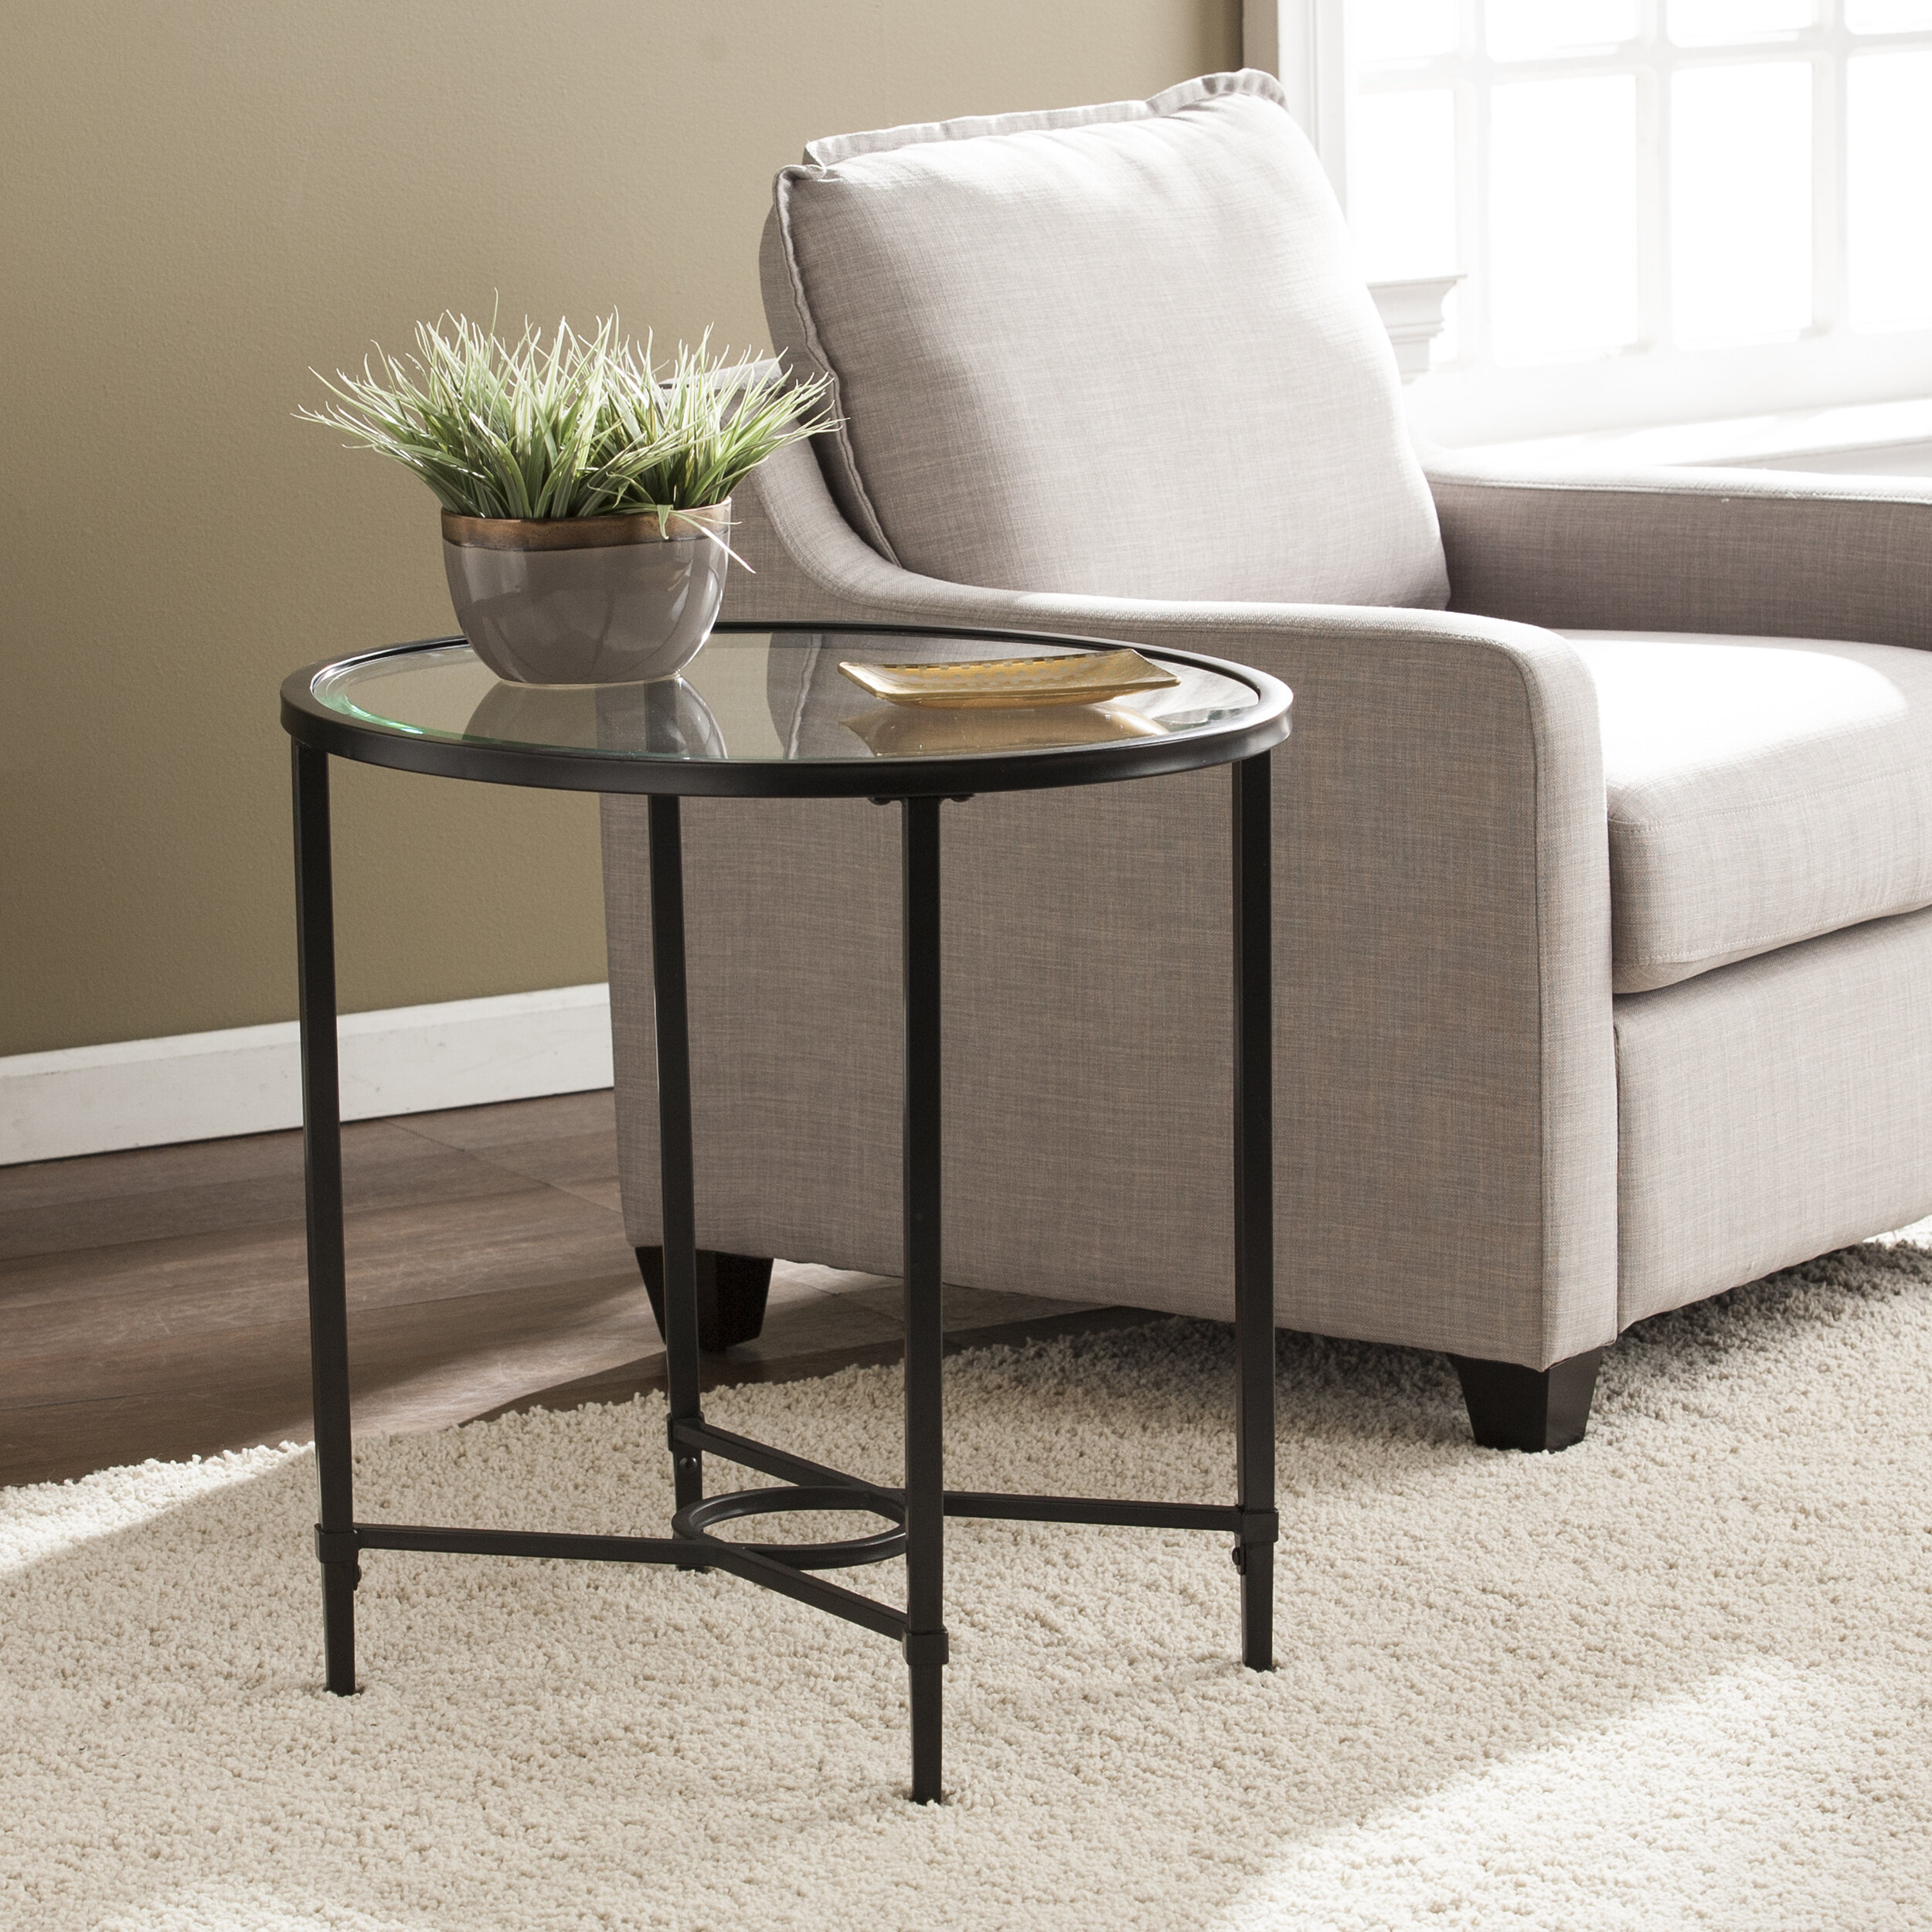 Round Side Table Accent Table End Table Coffee Table Nightstand w/ Glass Top 